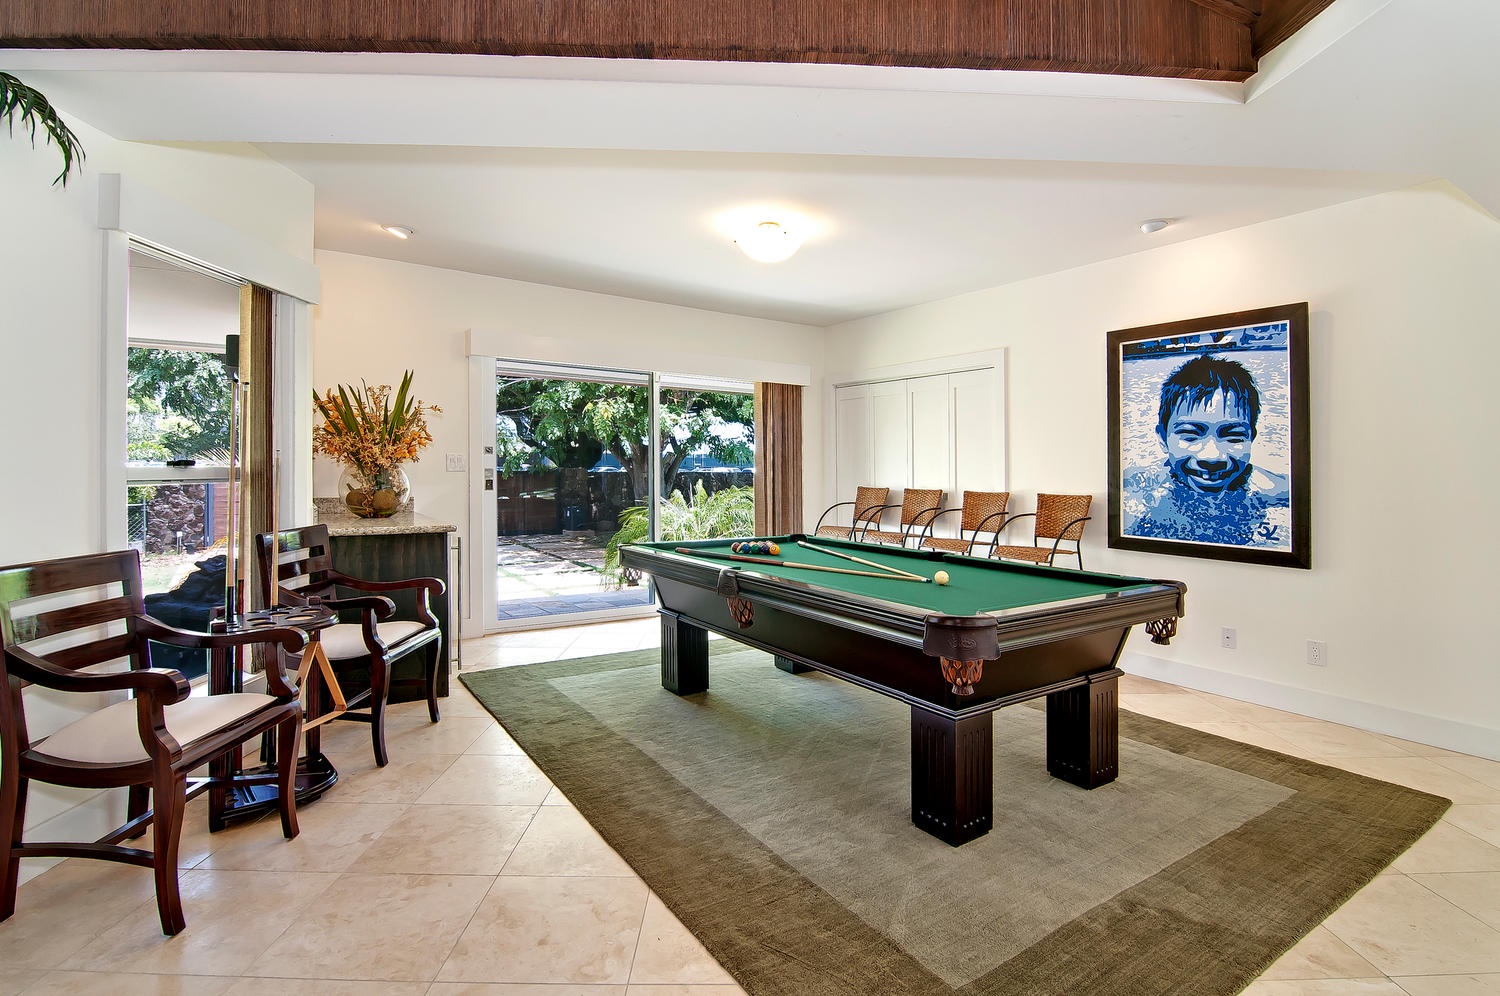 Honolulu Vacation Rentals, Kahala Lani - Game Area with Pool Table Convertible to a Ping Pong Table